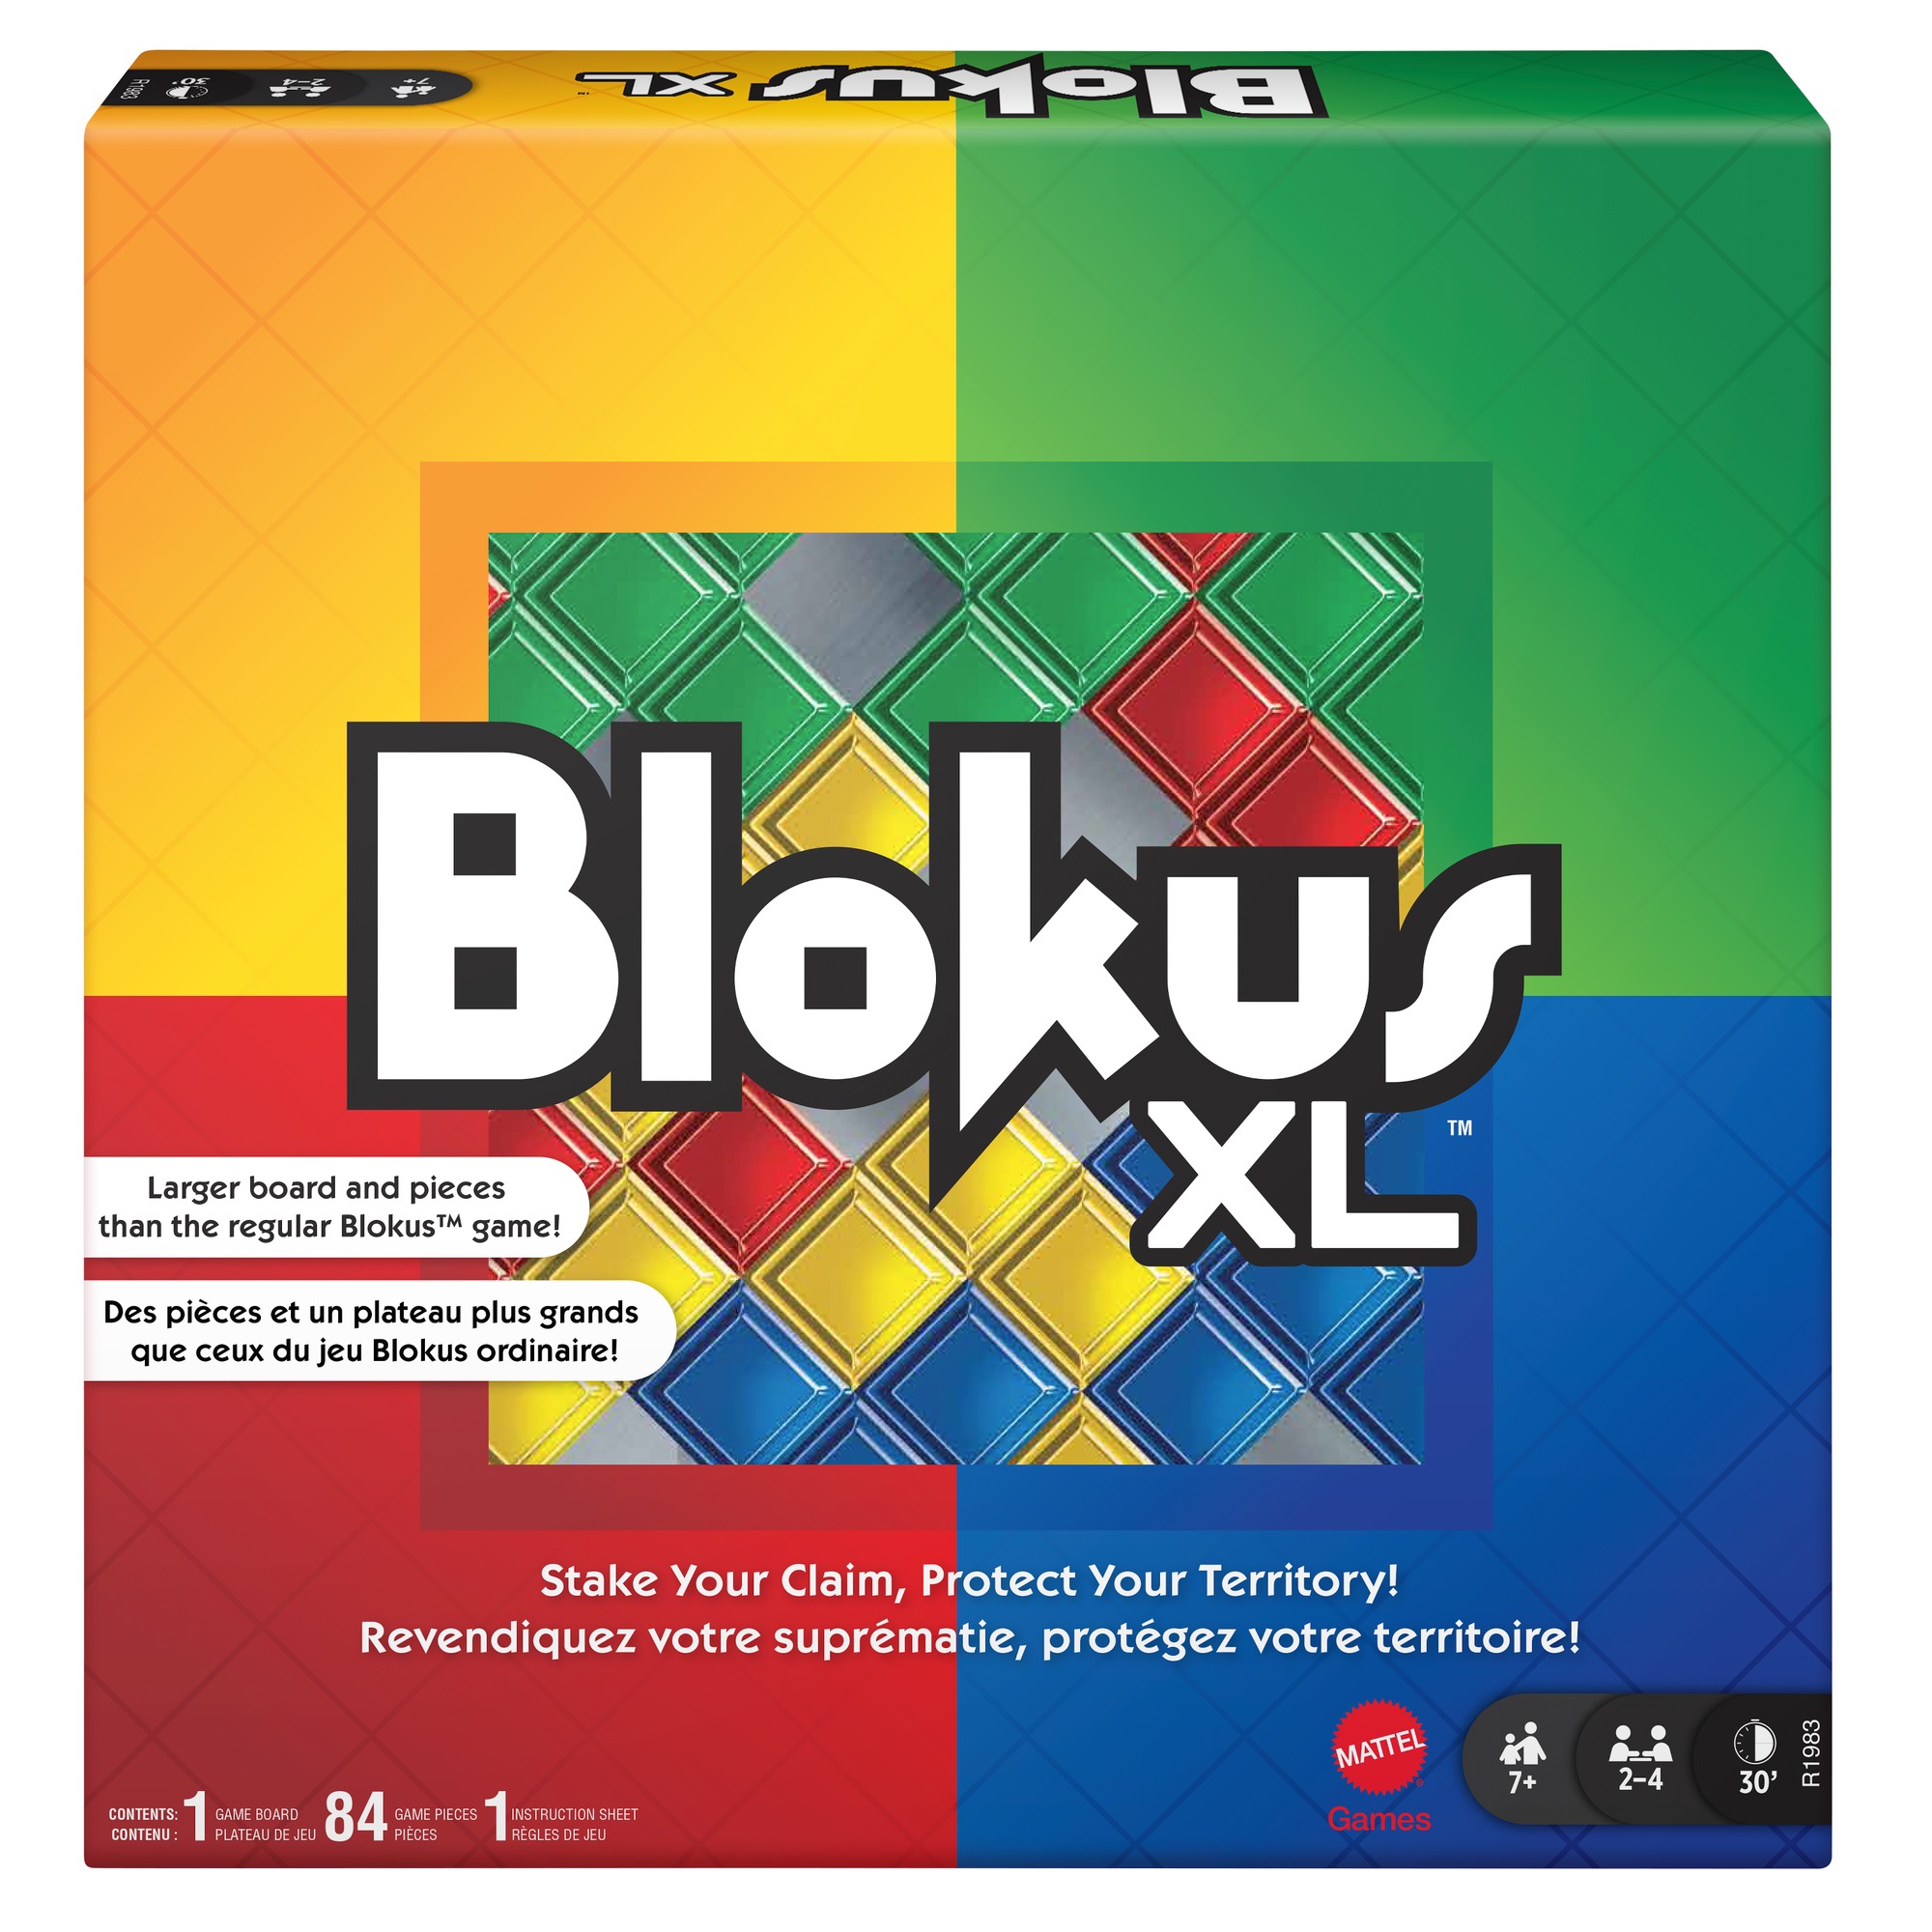 Blokus XL Family Board Games, Brain Games with Large Board and Pieces - image 1 of 6